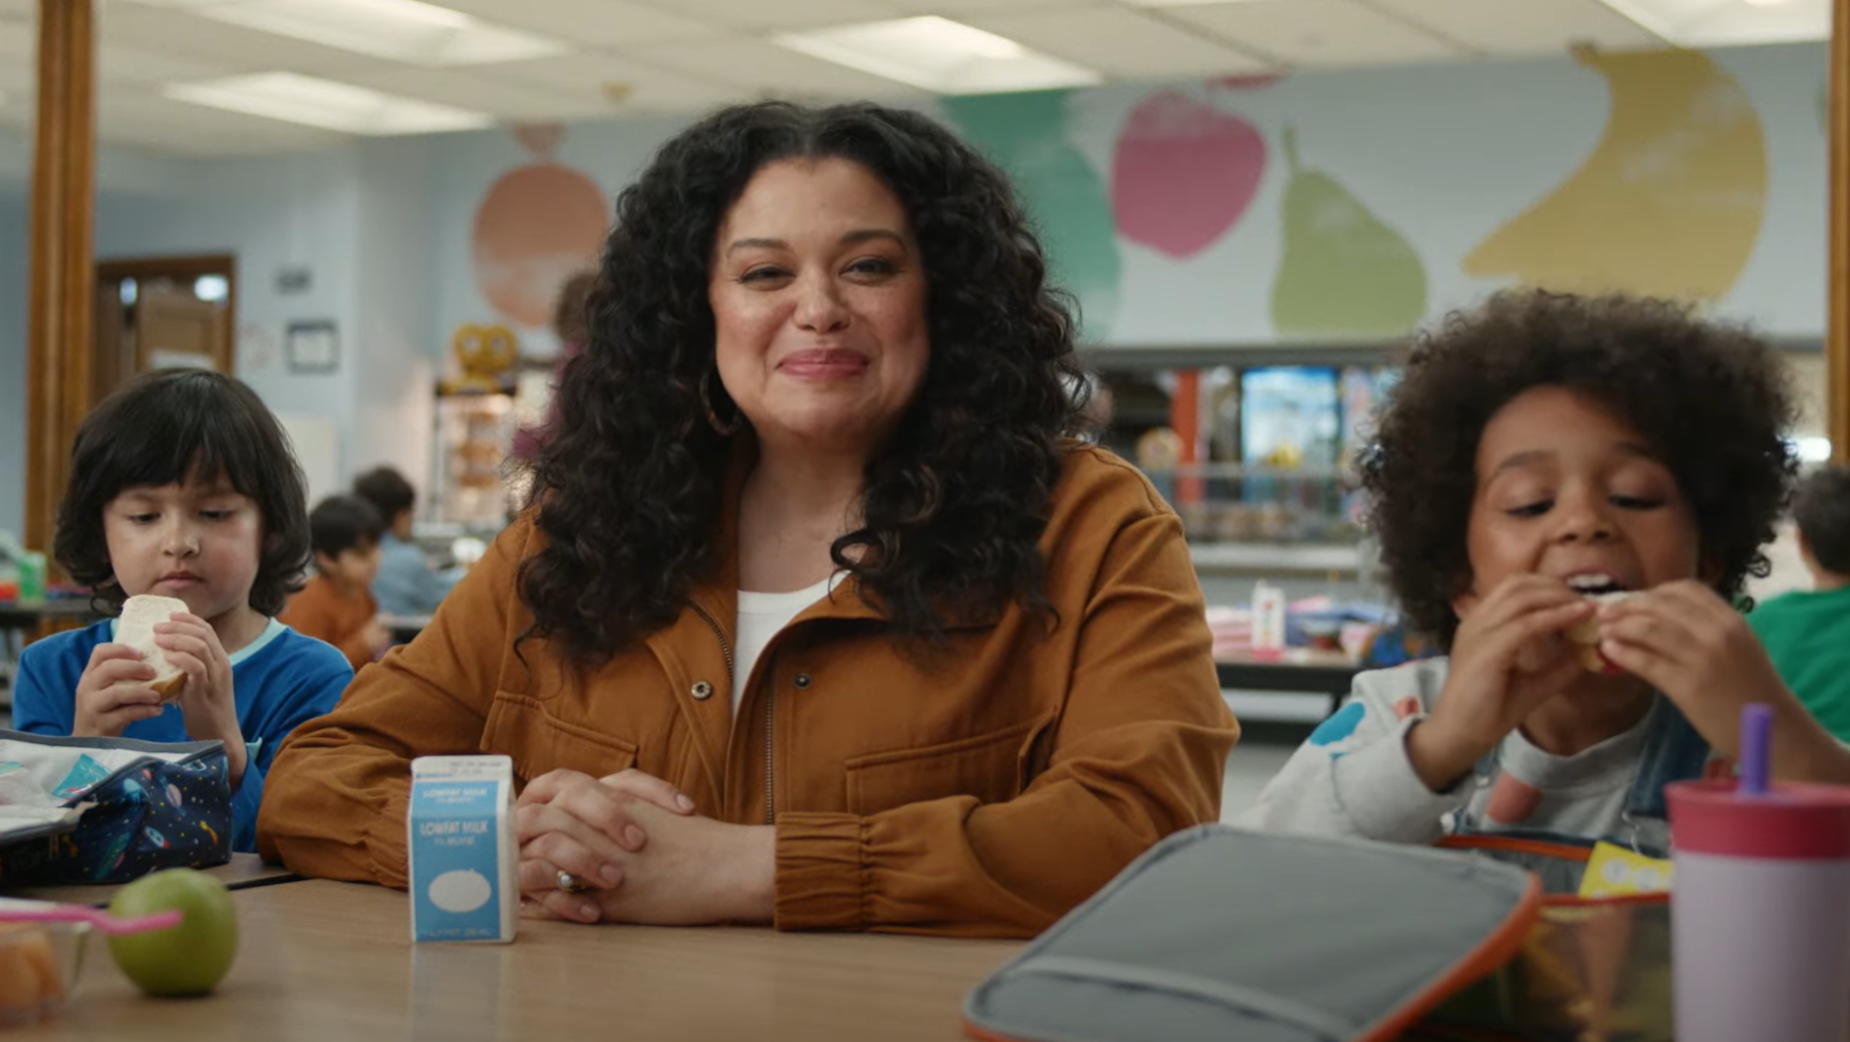 Amazon's Straight Talking Spokesparent Michelle Buteau Wants You to Spend Less on Your Kids | LBBOnline